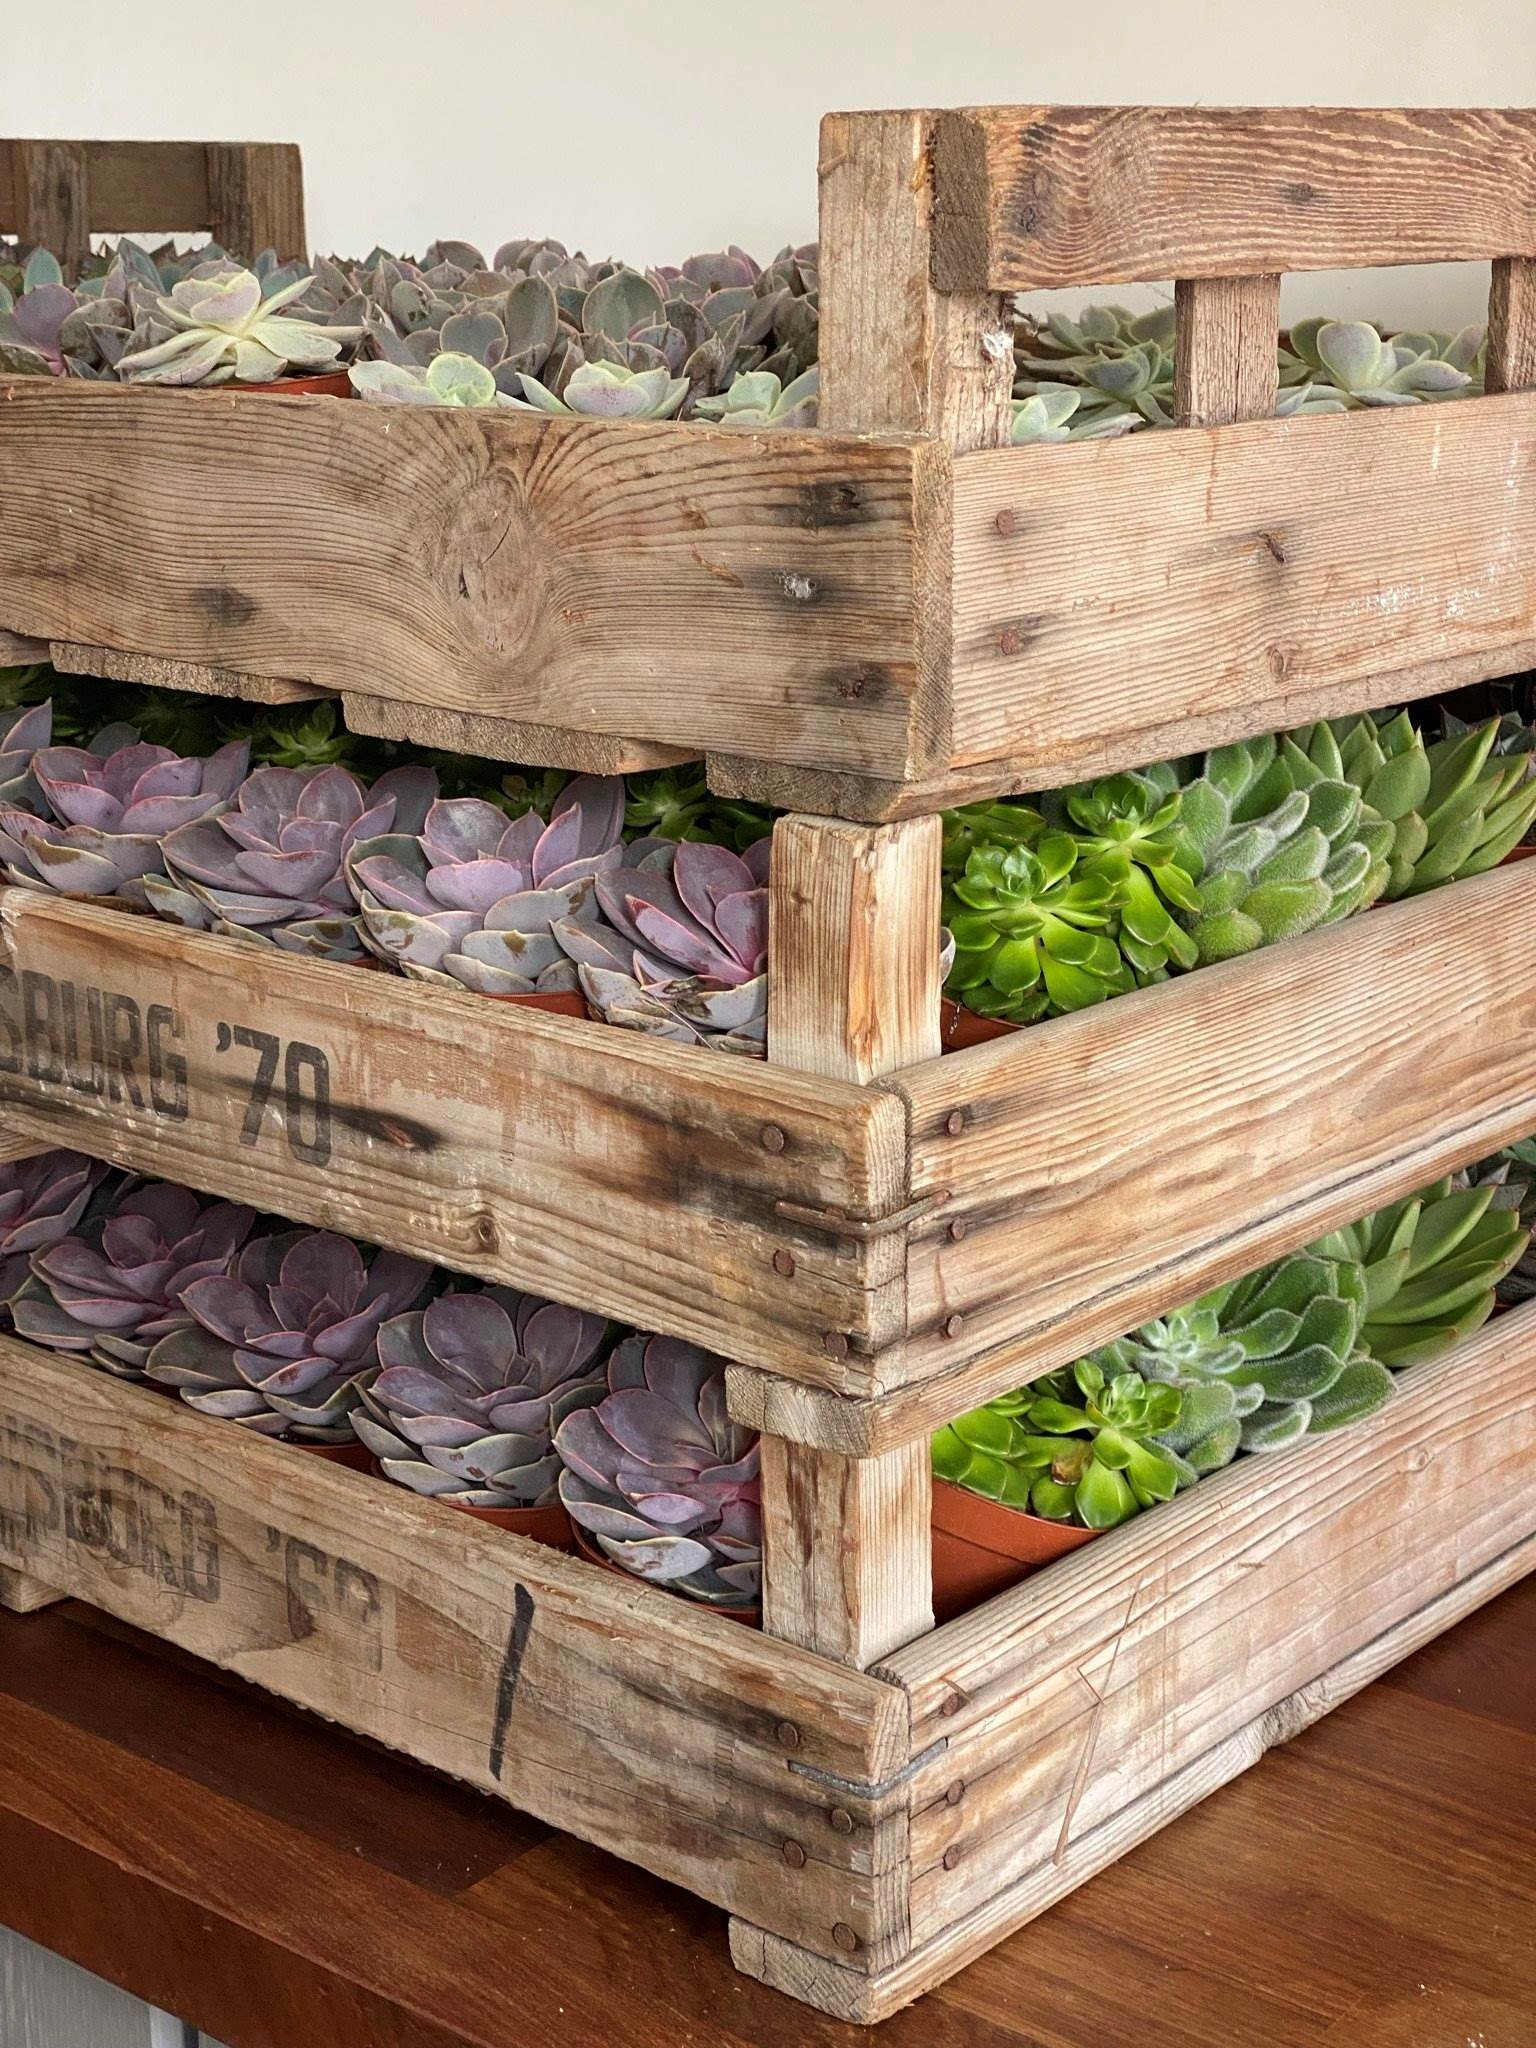 Stacked crates of various succulent plants